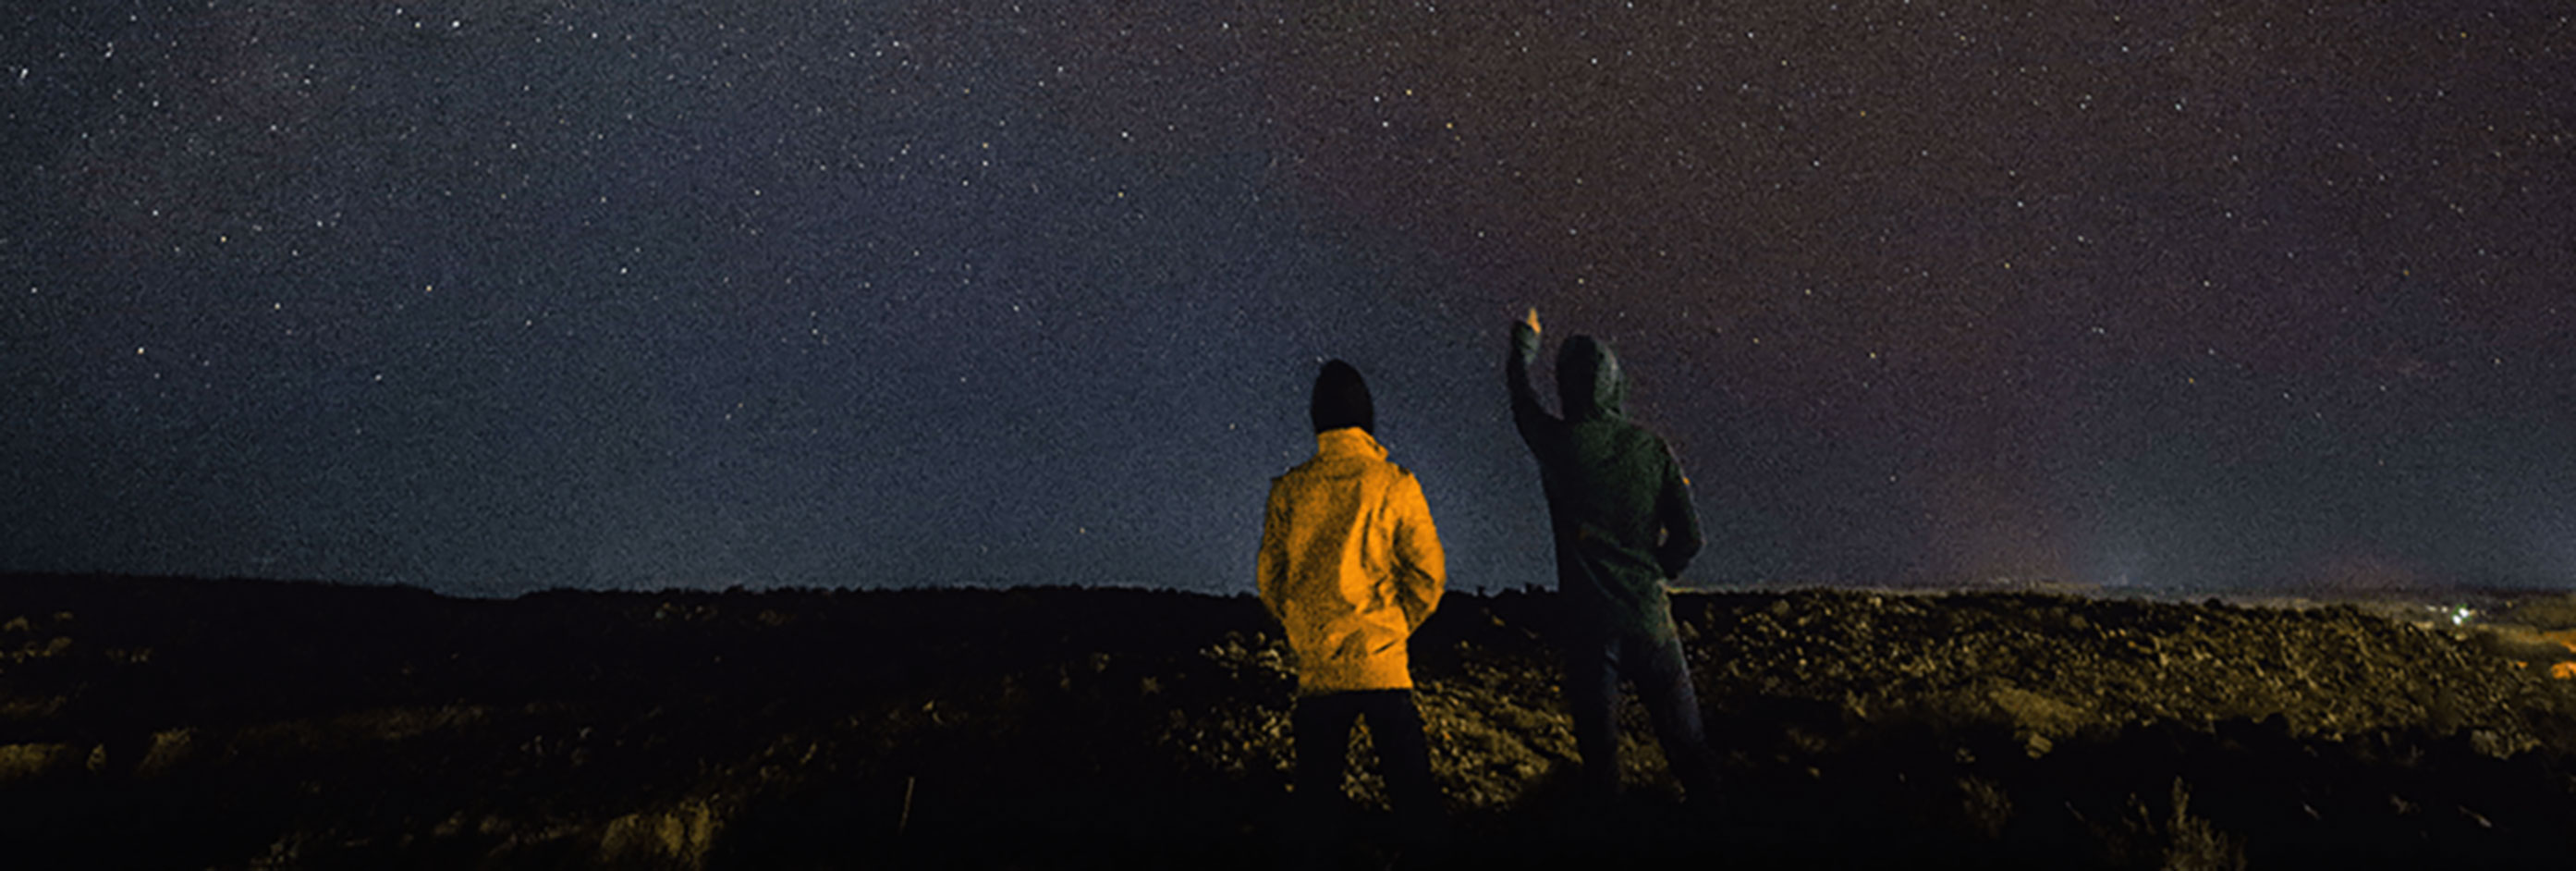 two people looking at the stars